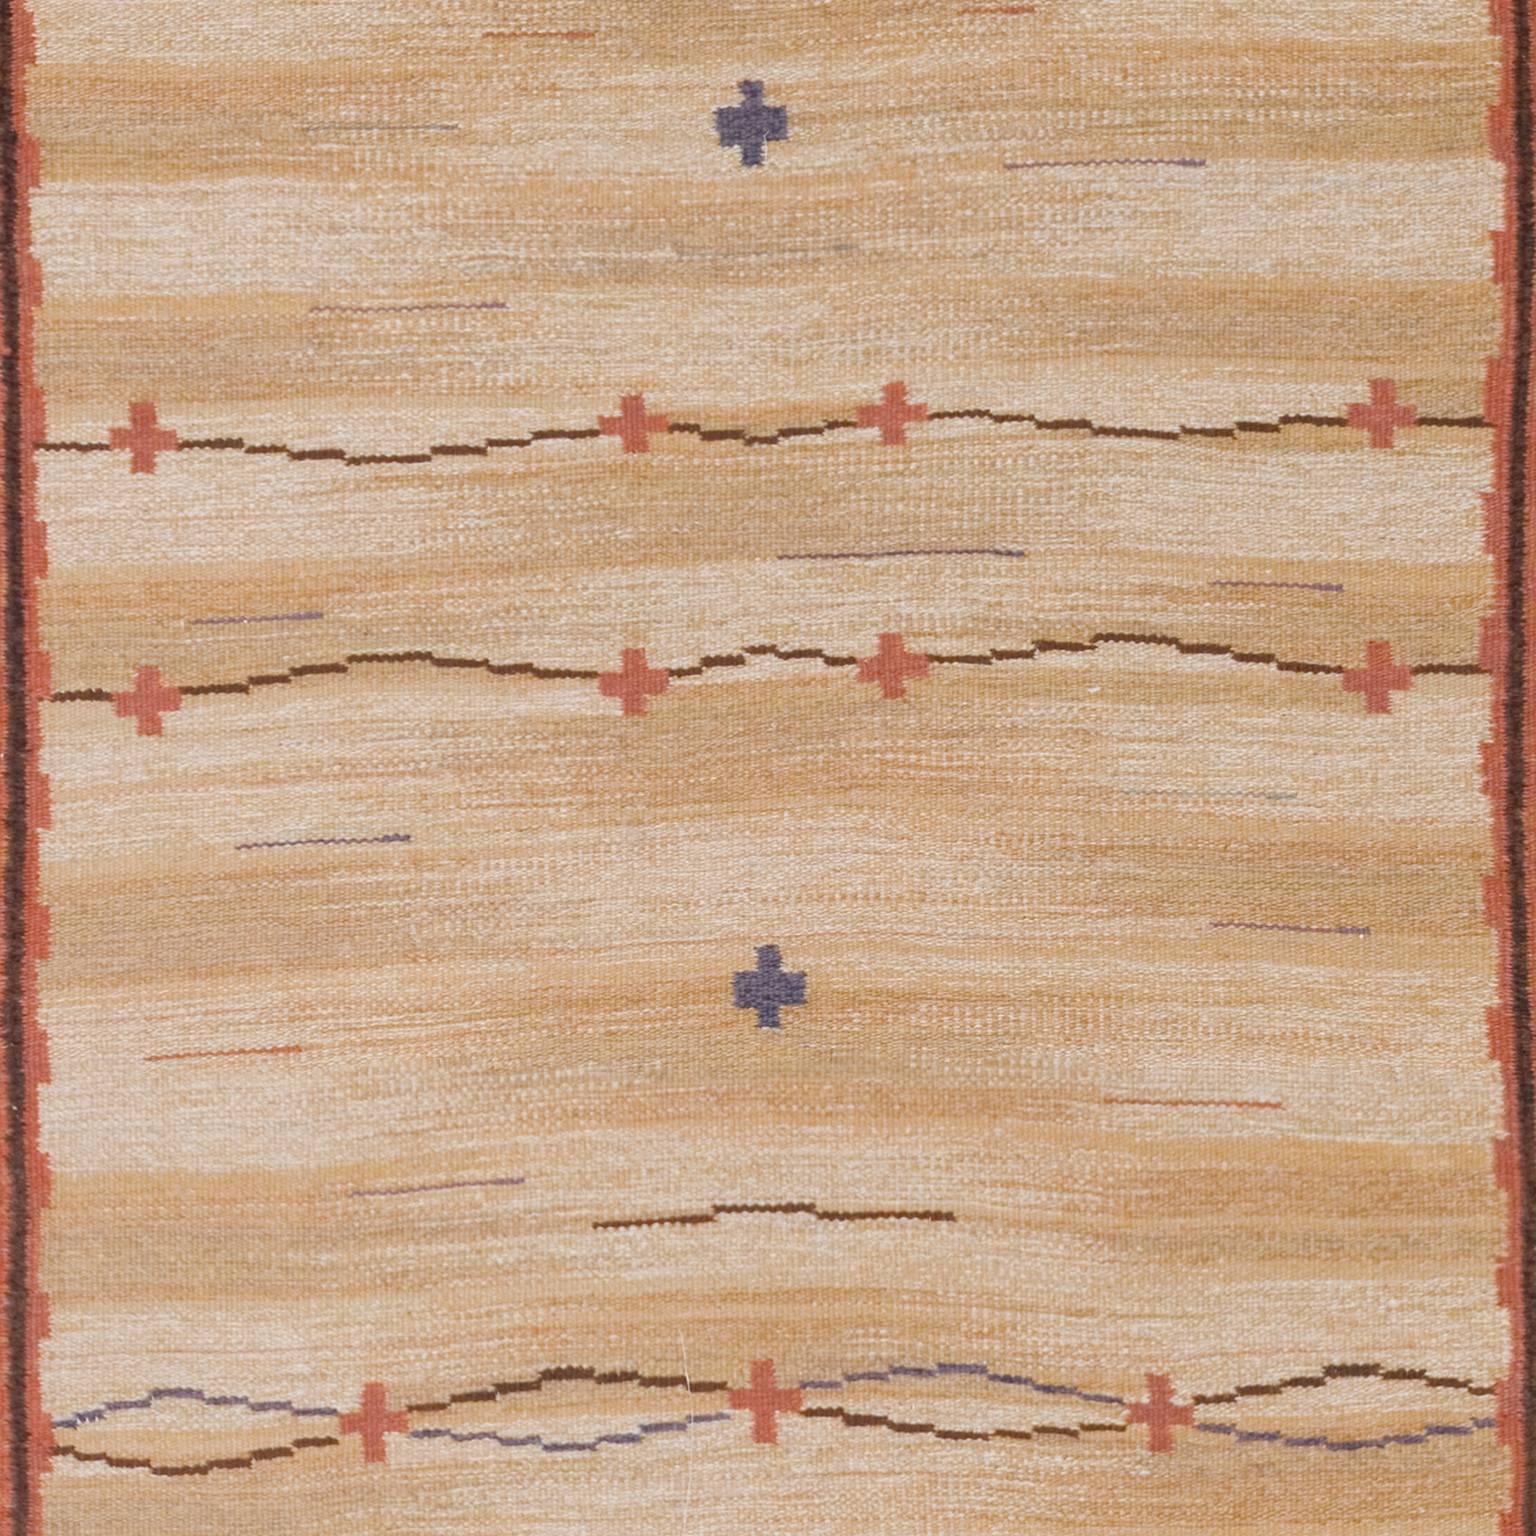 Hand-Woven Swedish Flat-Weave Rug, 1933 For Sale